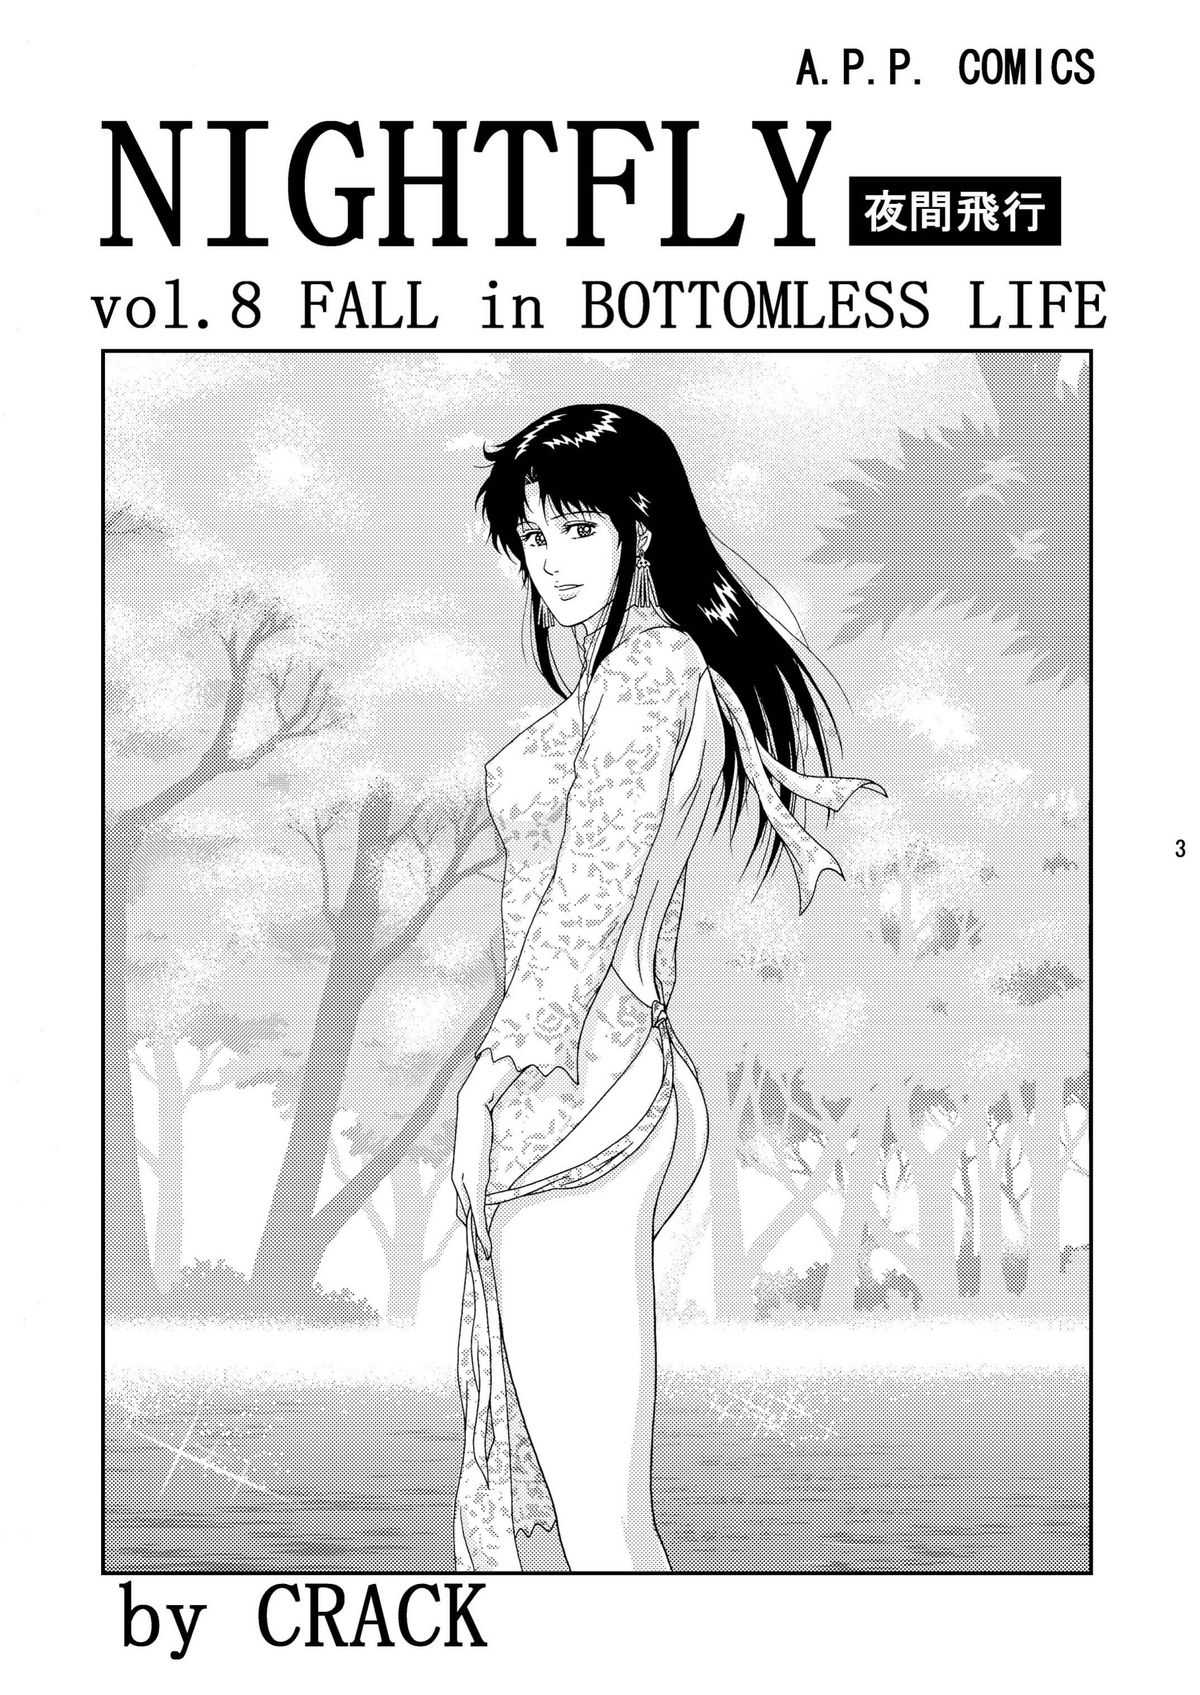 [Atelier pin point] Nightfly vol 8 - fall in bottomless life (Cat&#039;s eye) [アトリエ ピン・ポイント] 夜間飛行 vol. 8 FALL in BOTTOML:ESS LIFE (キャッツ・アイ)